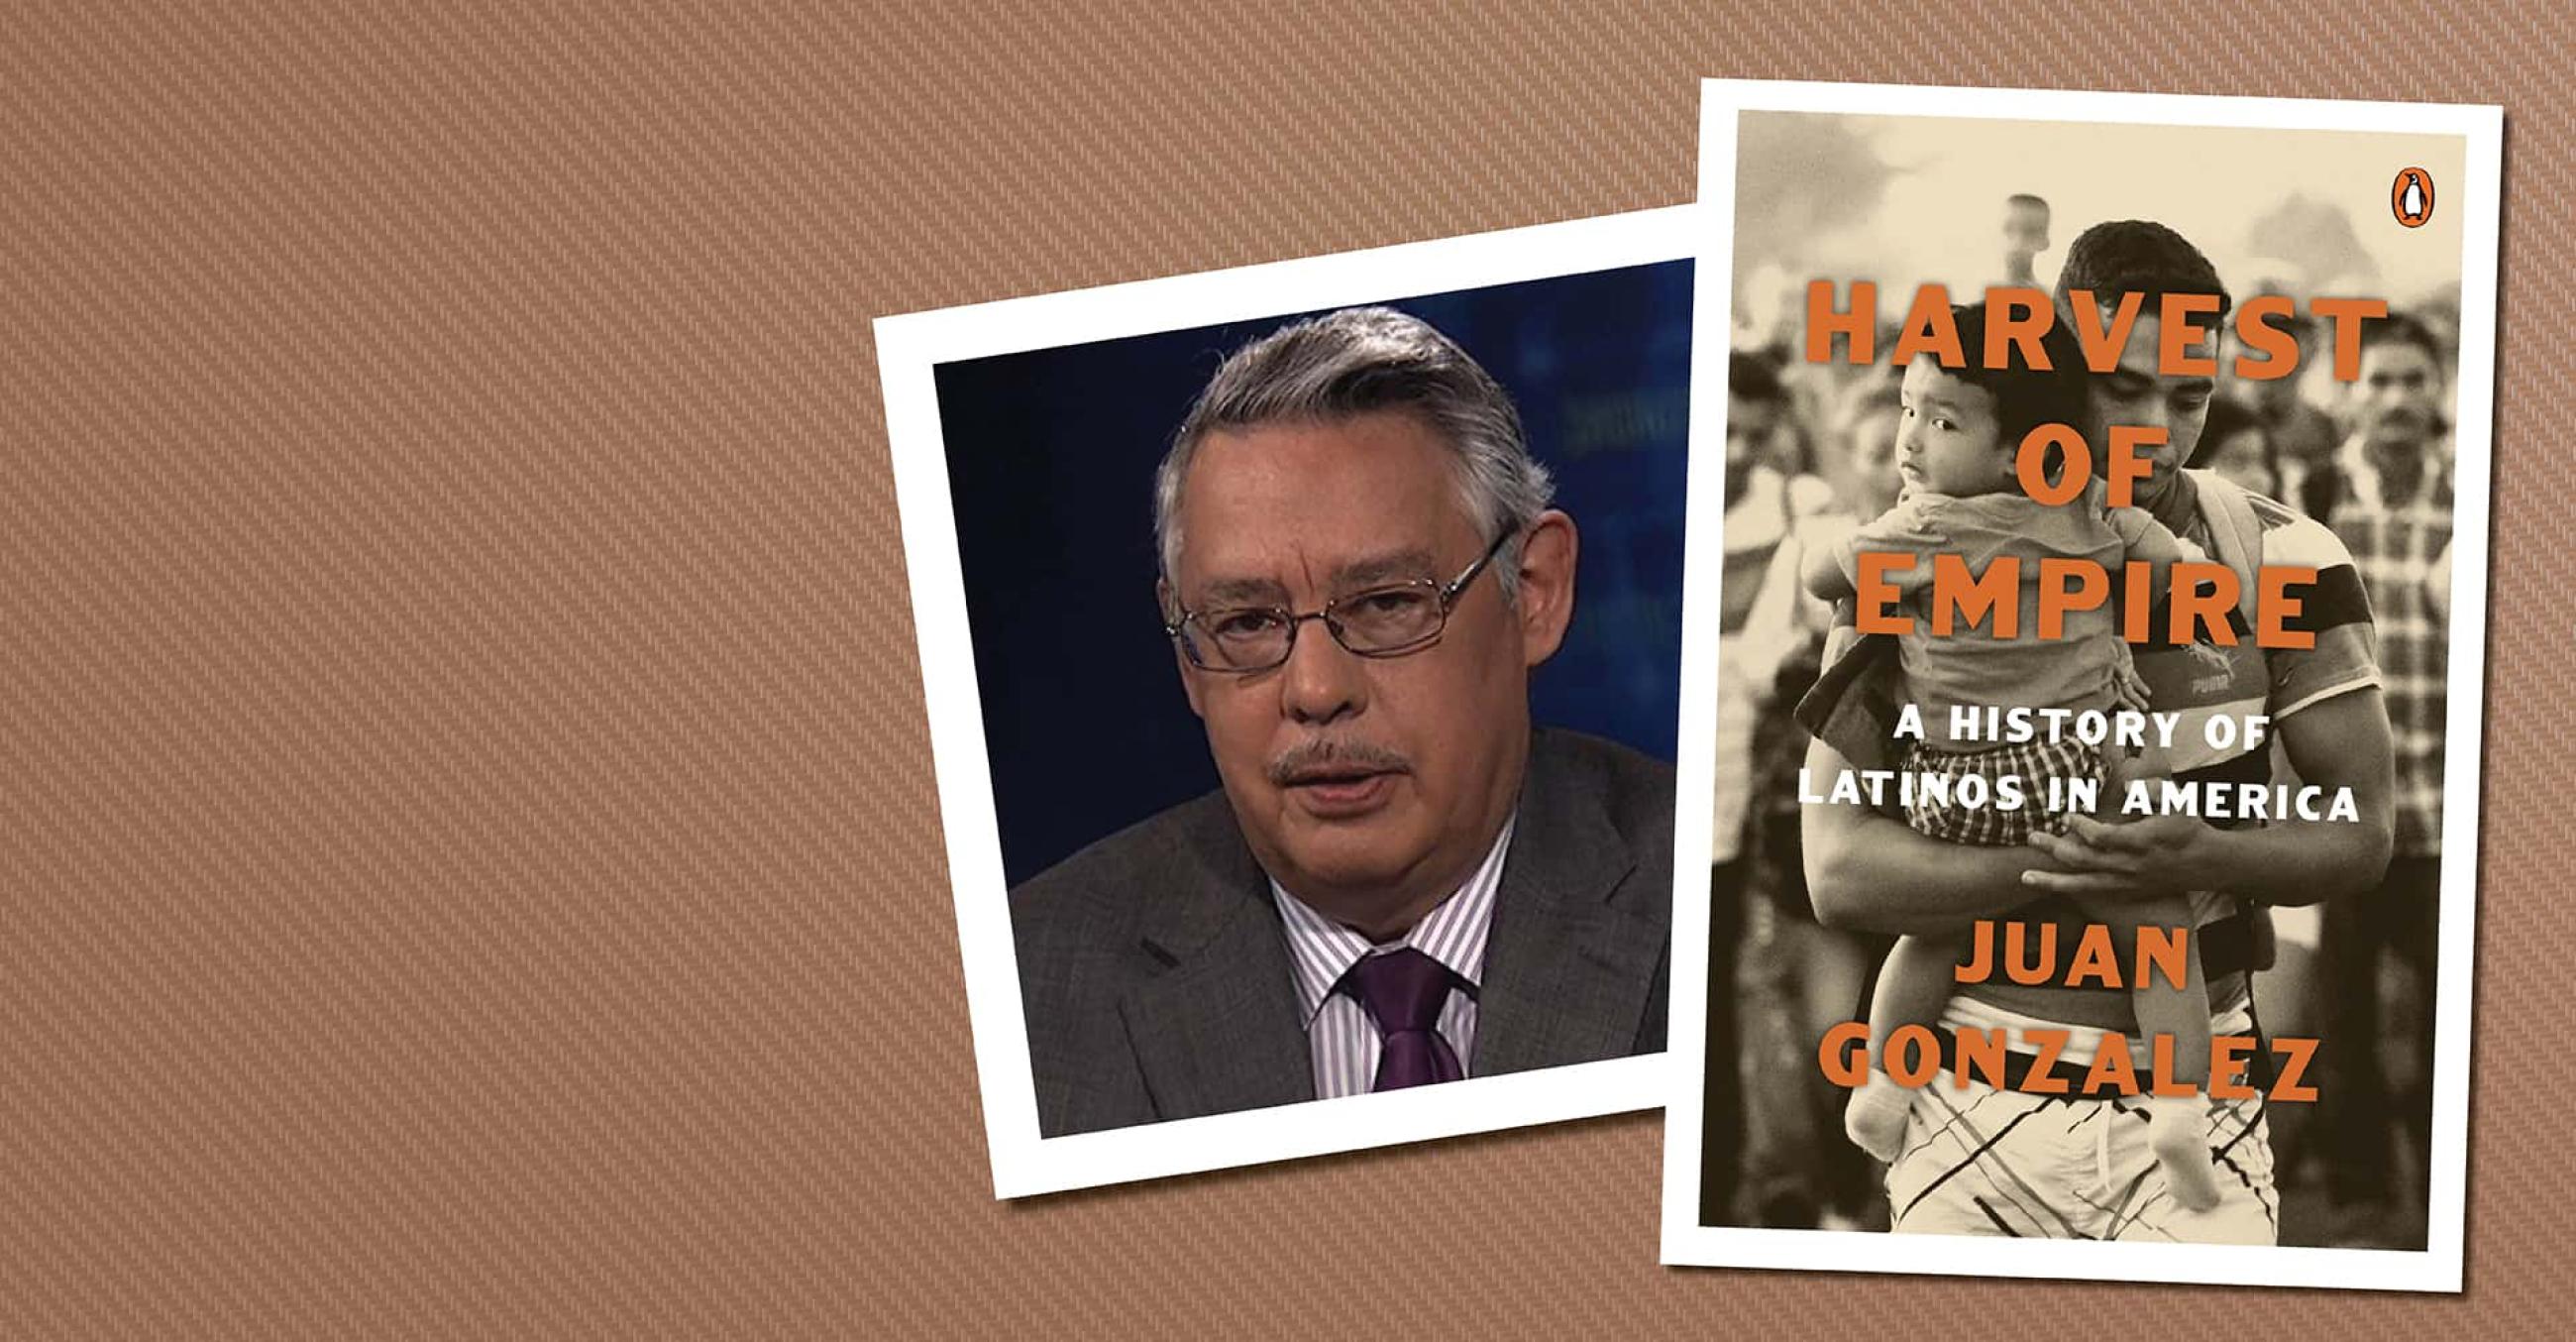 a photo of Juan Gonzalez alongside an image of the cover of his book "Harvest of Empire"